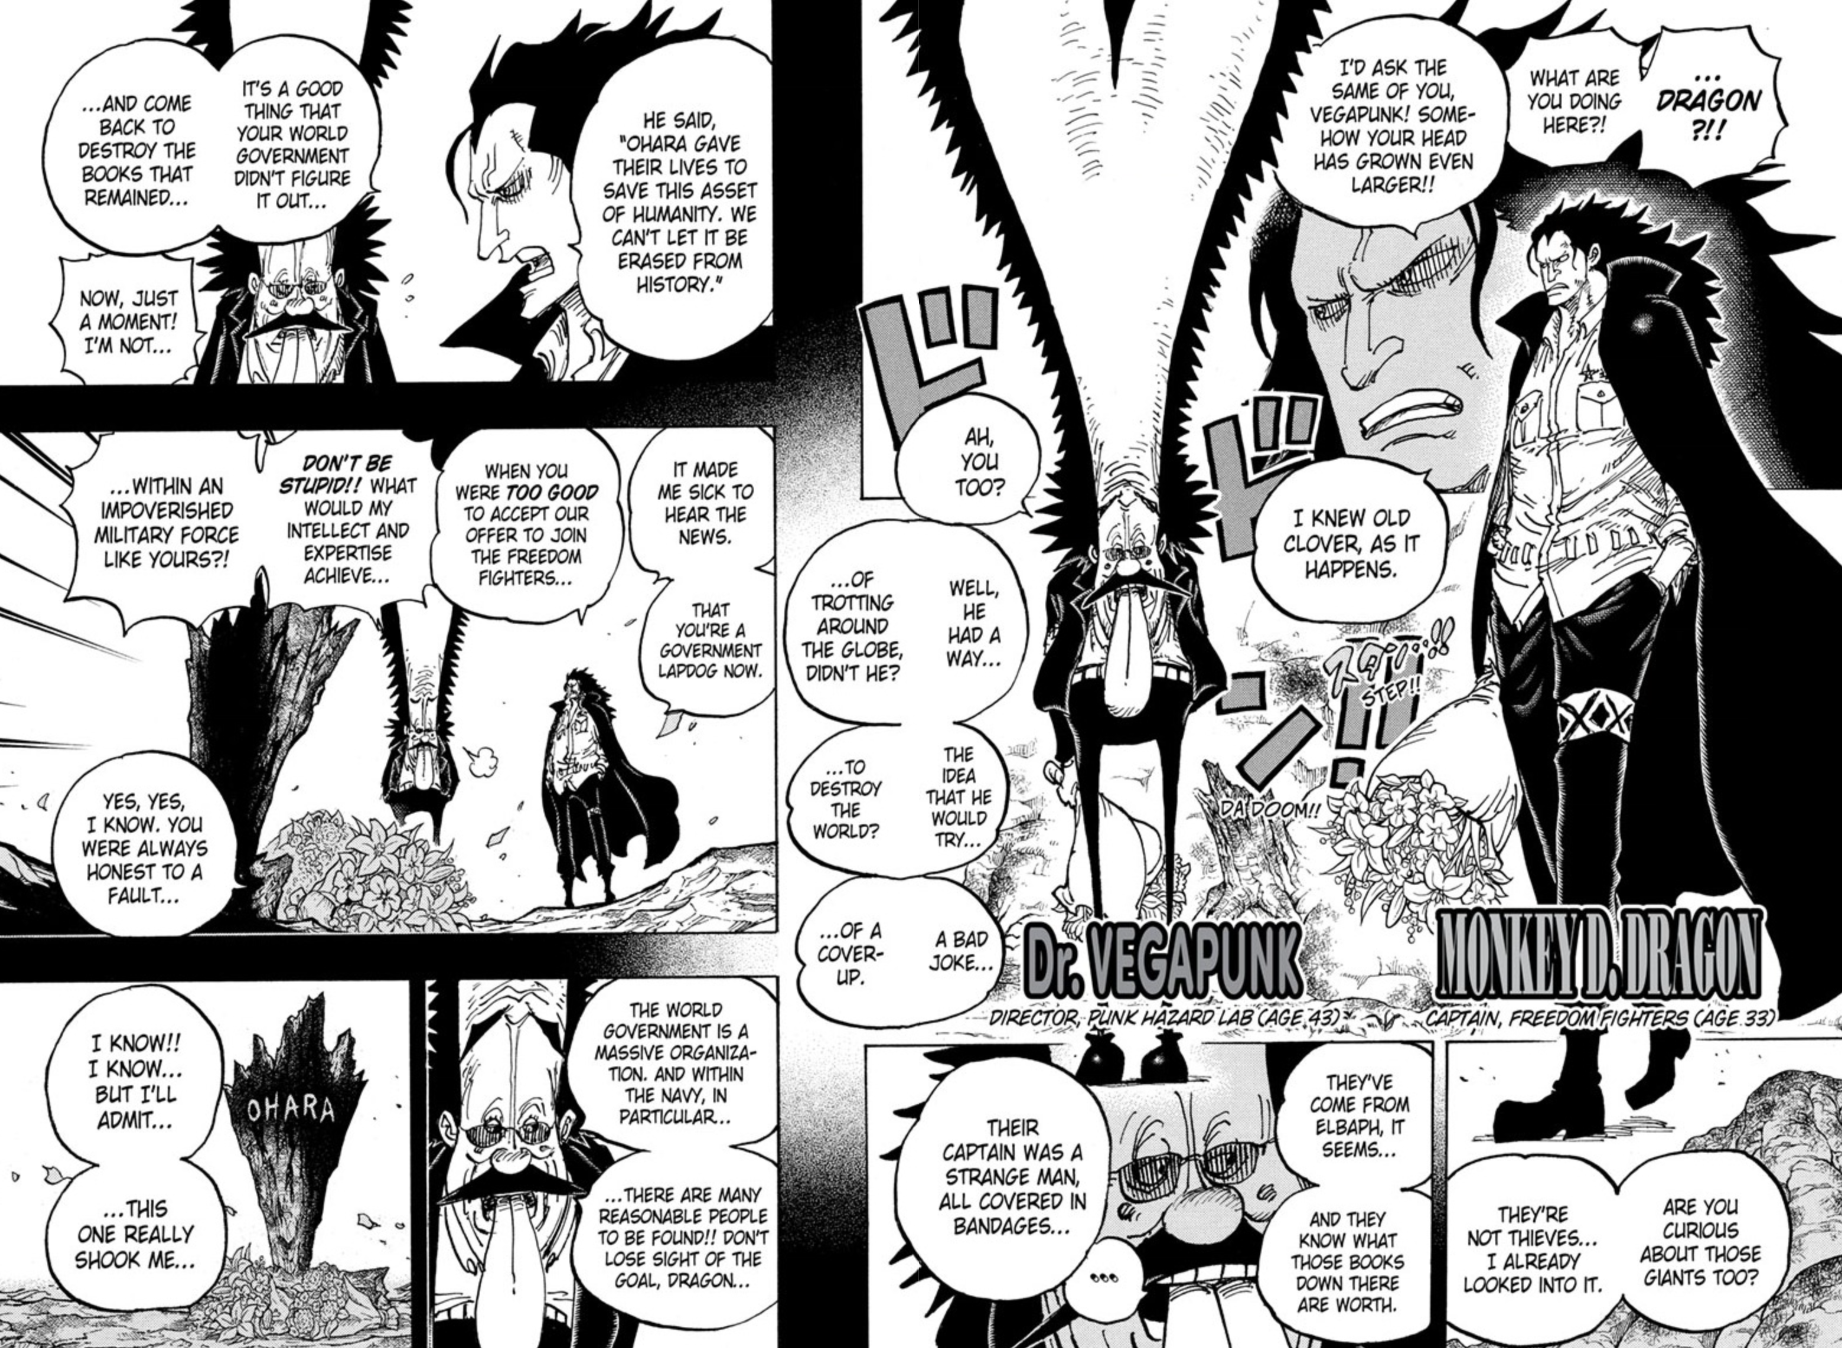 One Piece Chapter 1066 Pages 10-11